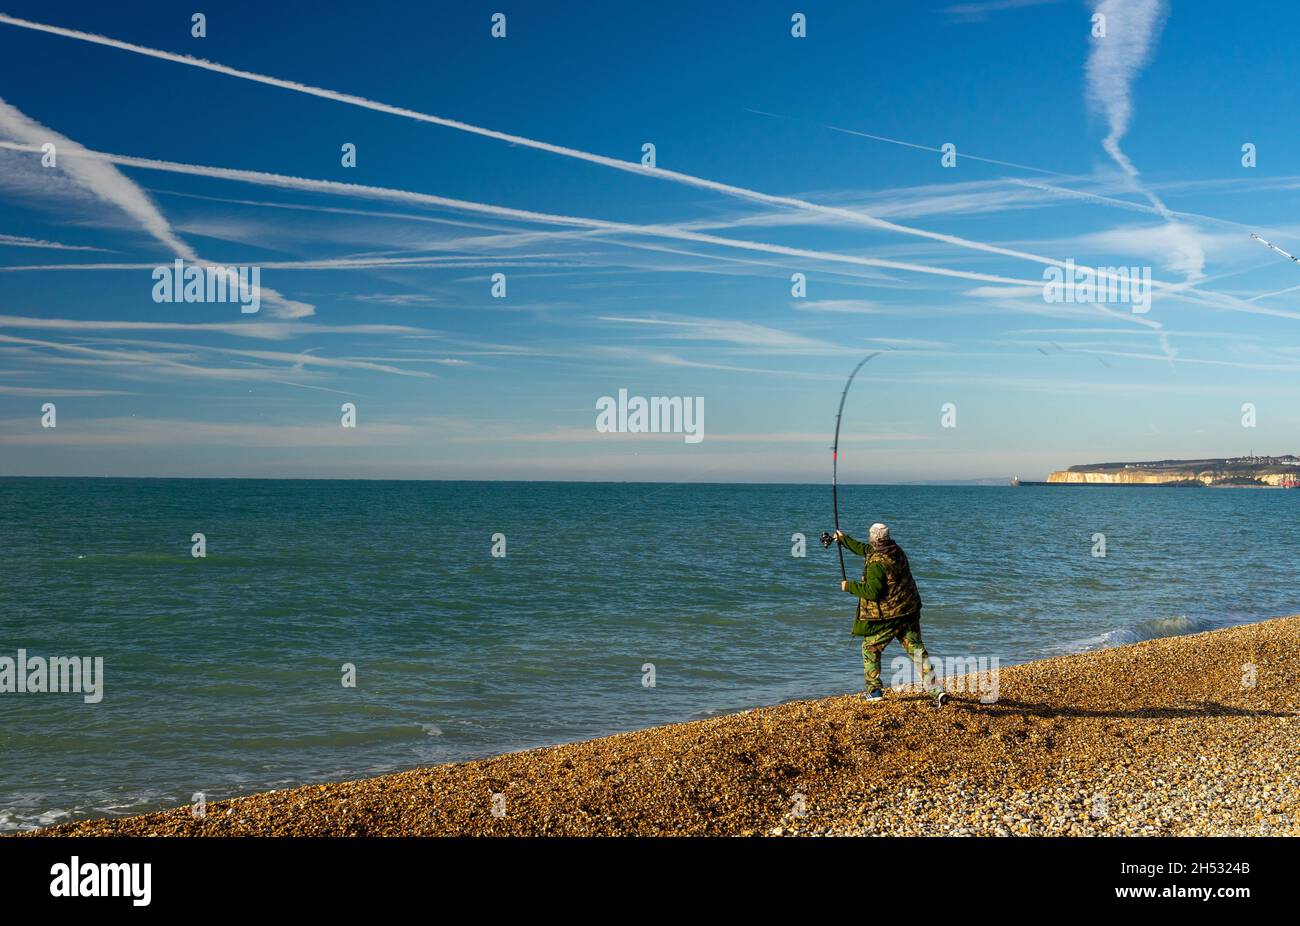 Casting on the beach under vapour trails Stock Photo